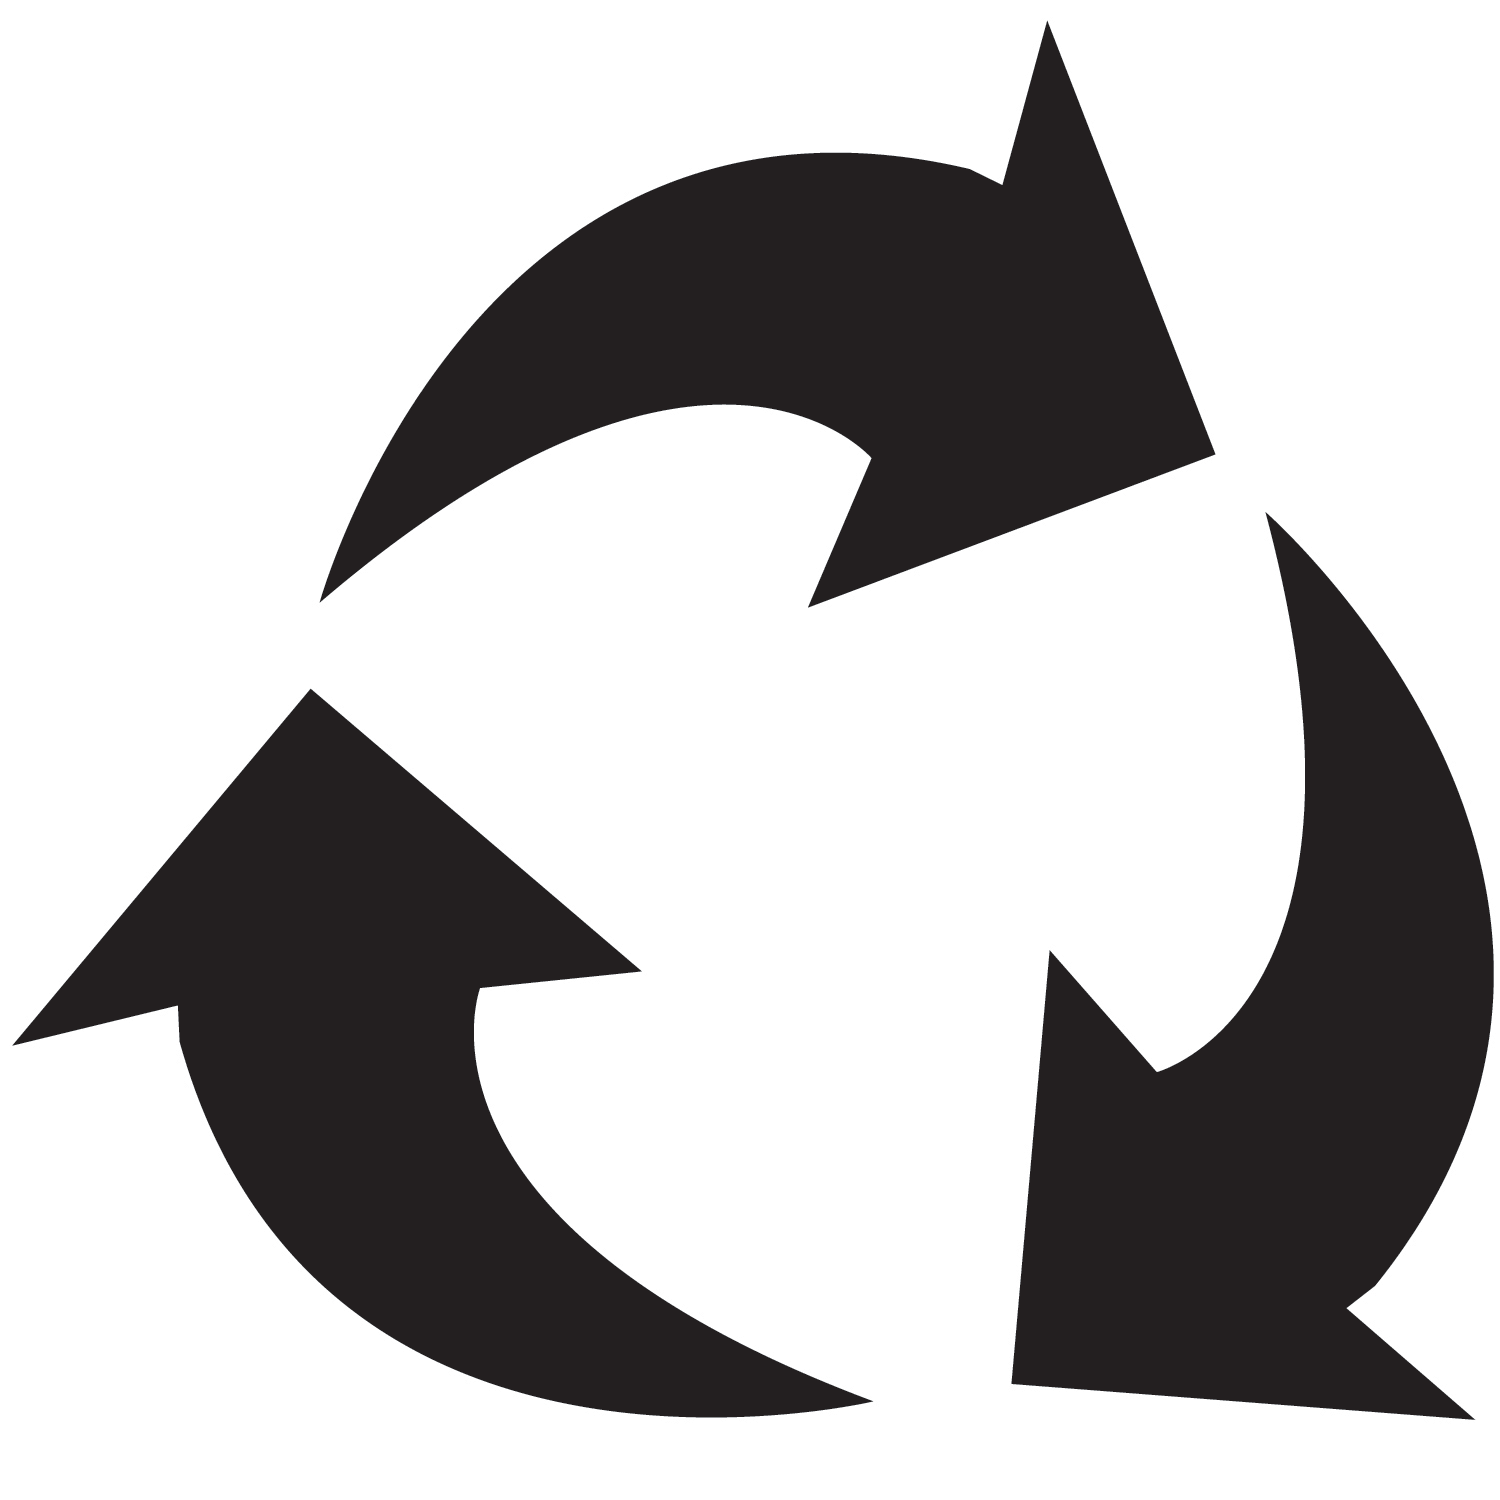 Recycling Symbol Png - ClipArt Best